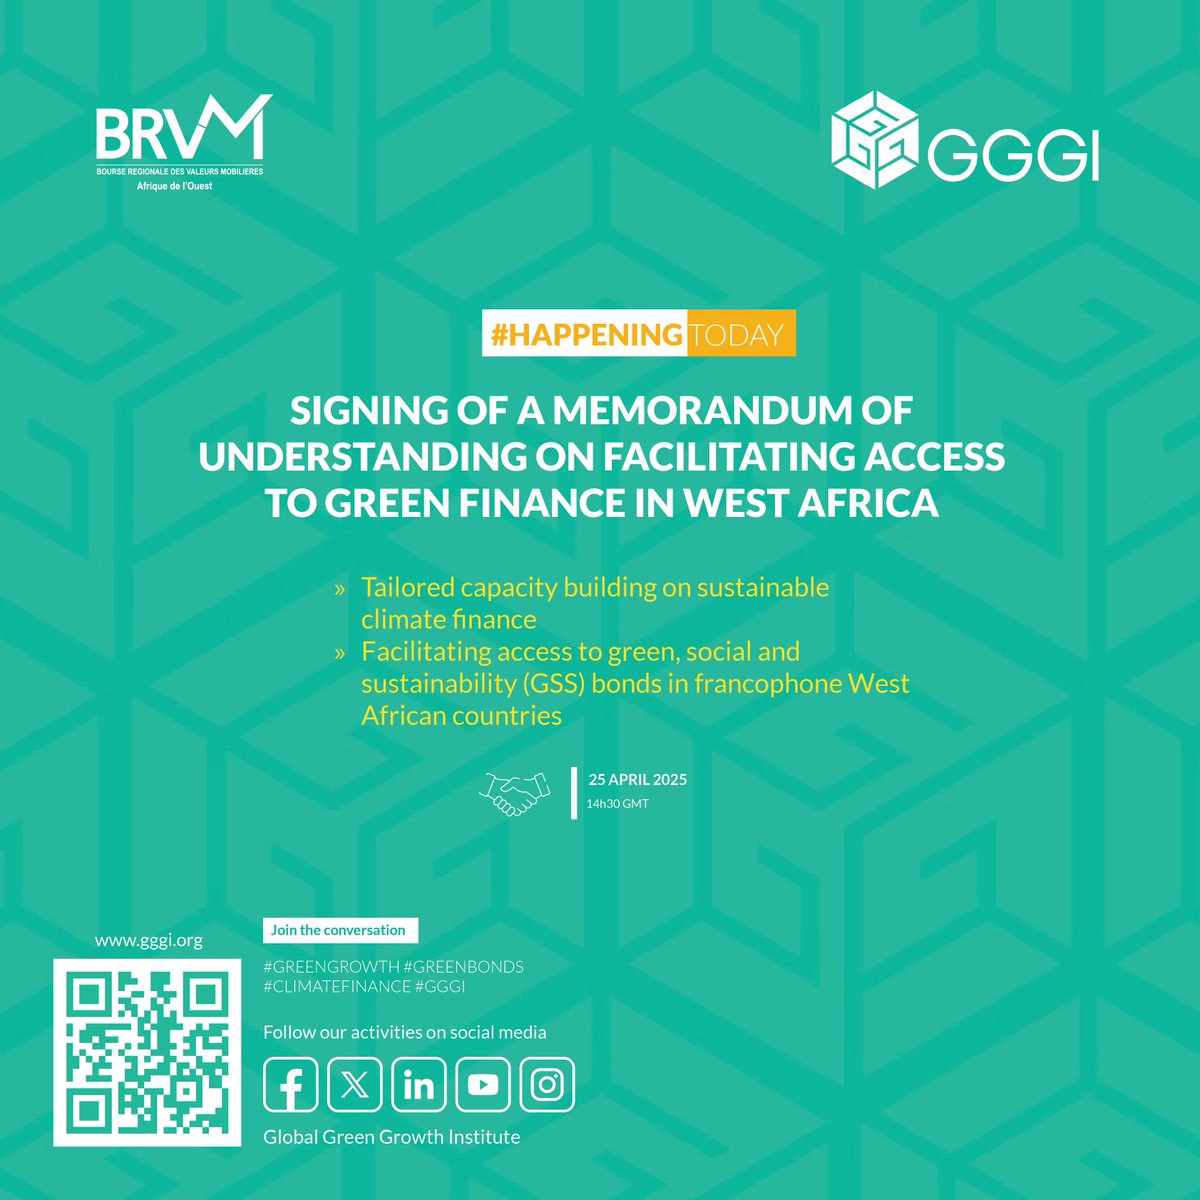 #HappeningToday: We are happy to announce that today we will sign a partnership agreement with @BRVM_UEMOA to facilitate access to #ClimateFinance for @UEMOA_Officiel countries. Watch this space as we unveil how this collaboration will work! #GreenGrowth #GreenBonds #GGGI